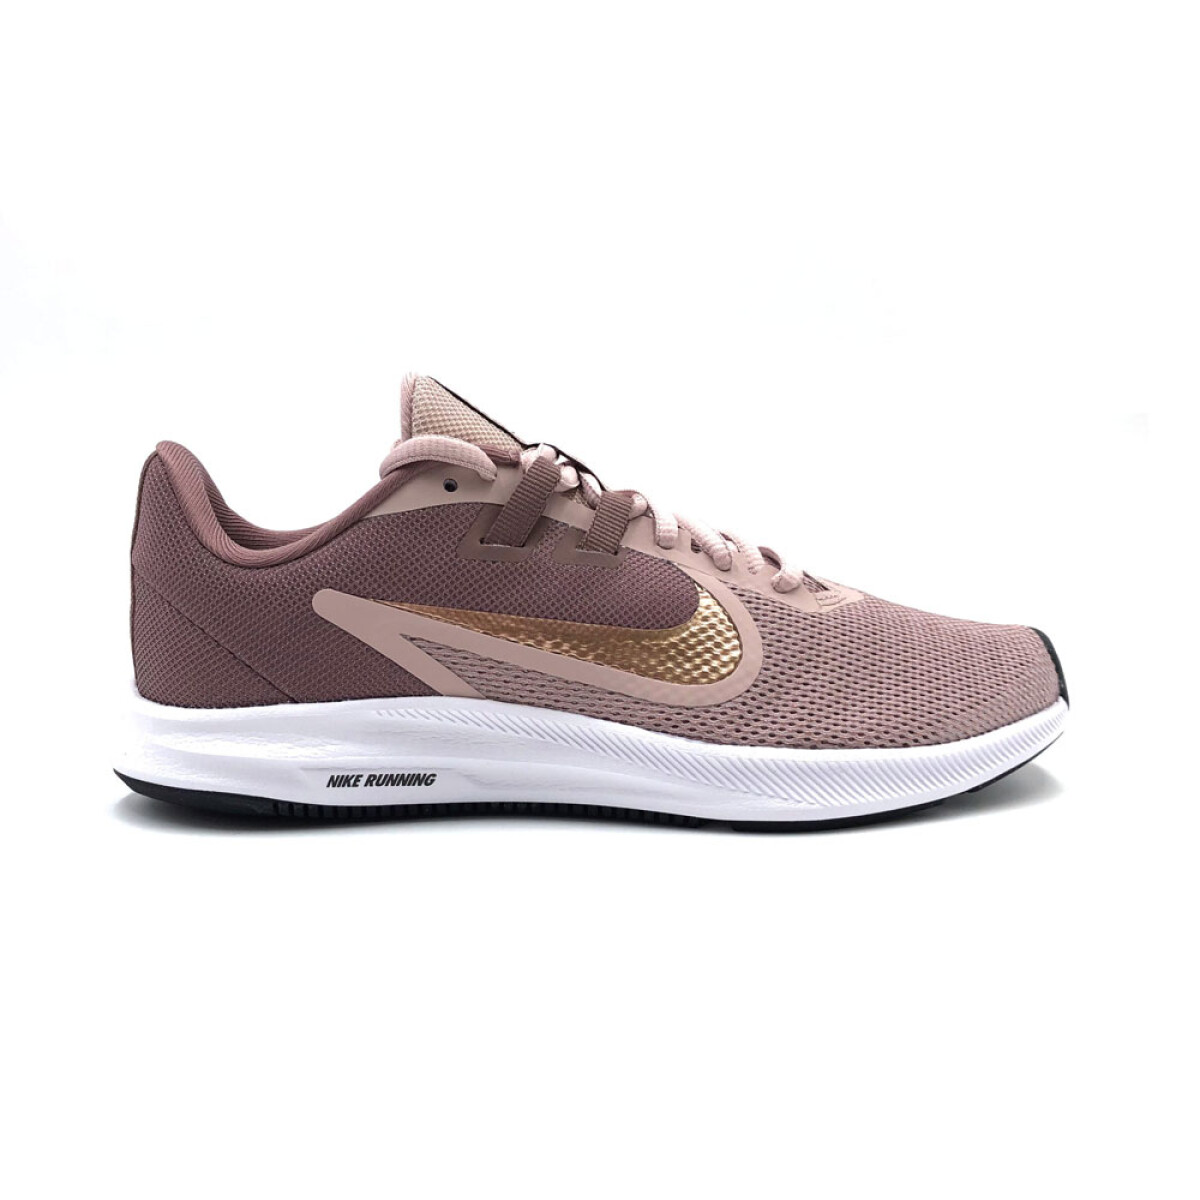 WMNS NIKE DOWNSHIFTER 9 - Brown 